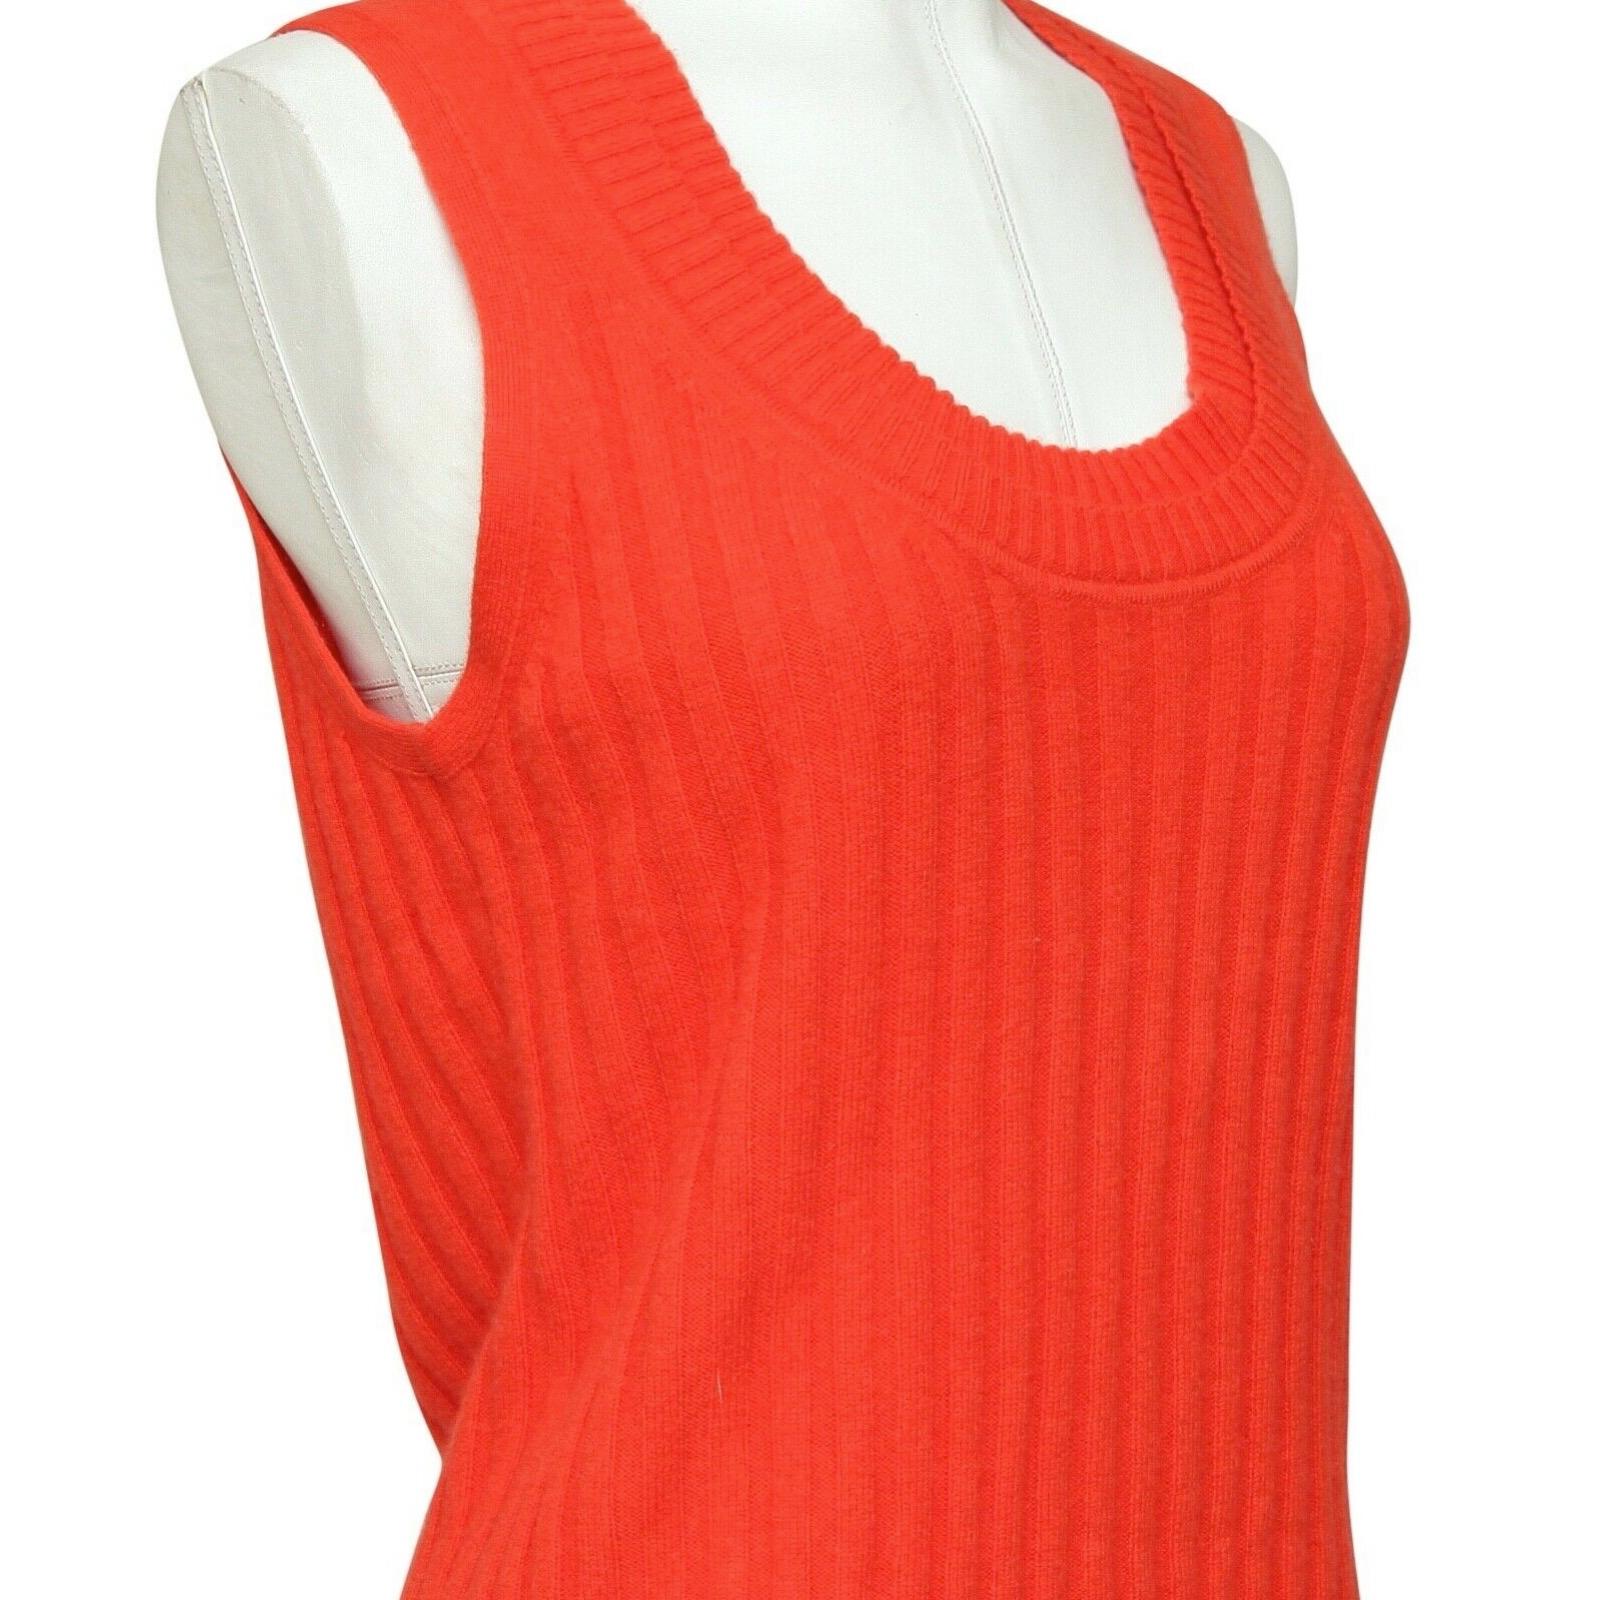 Red 3.1 PHILLIP LIM Orange Sweater Knit Sleeveless Scoop Neck Ribbed Cashmere L NWT